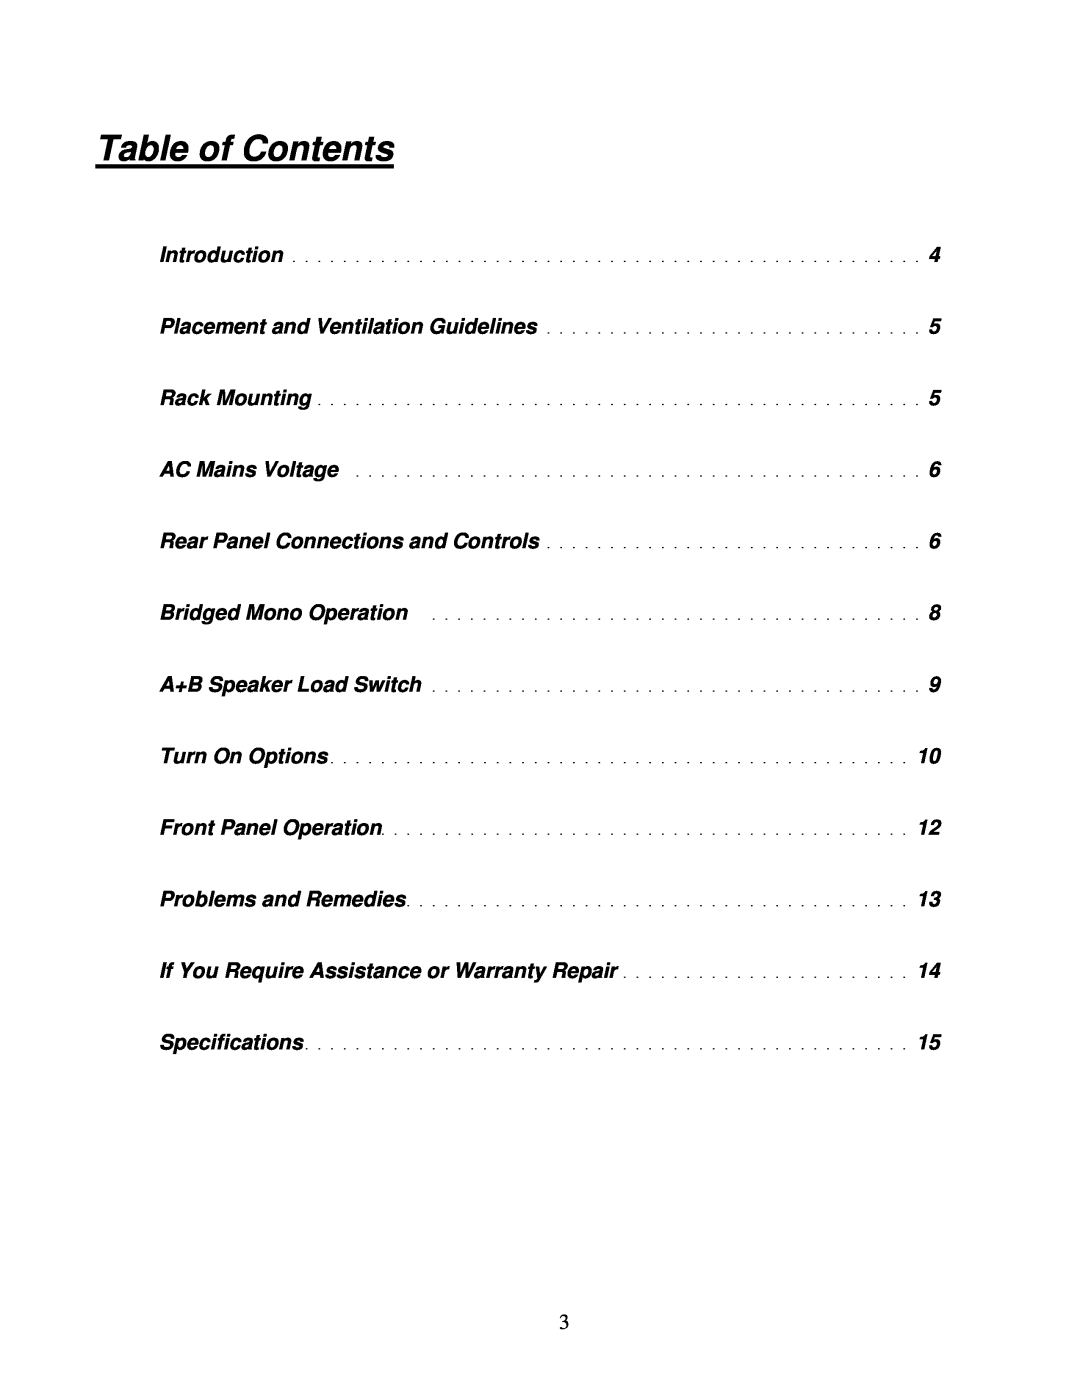 Parasound 275 V.2 manual Table of Contents 